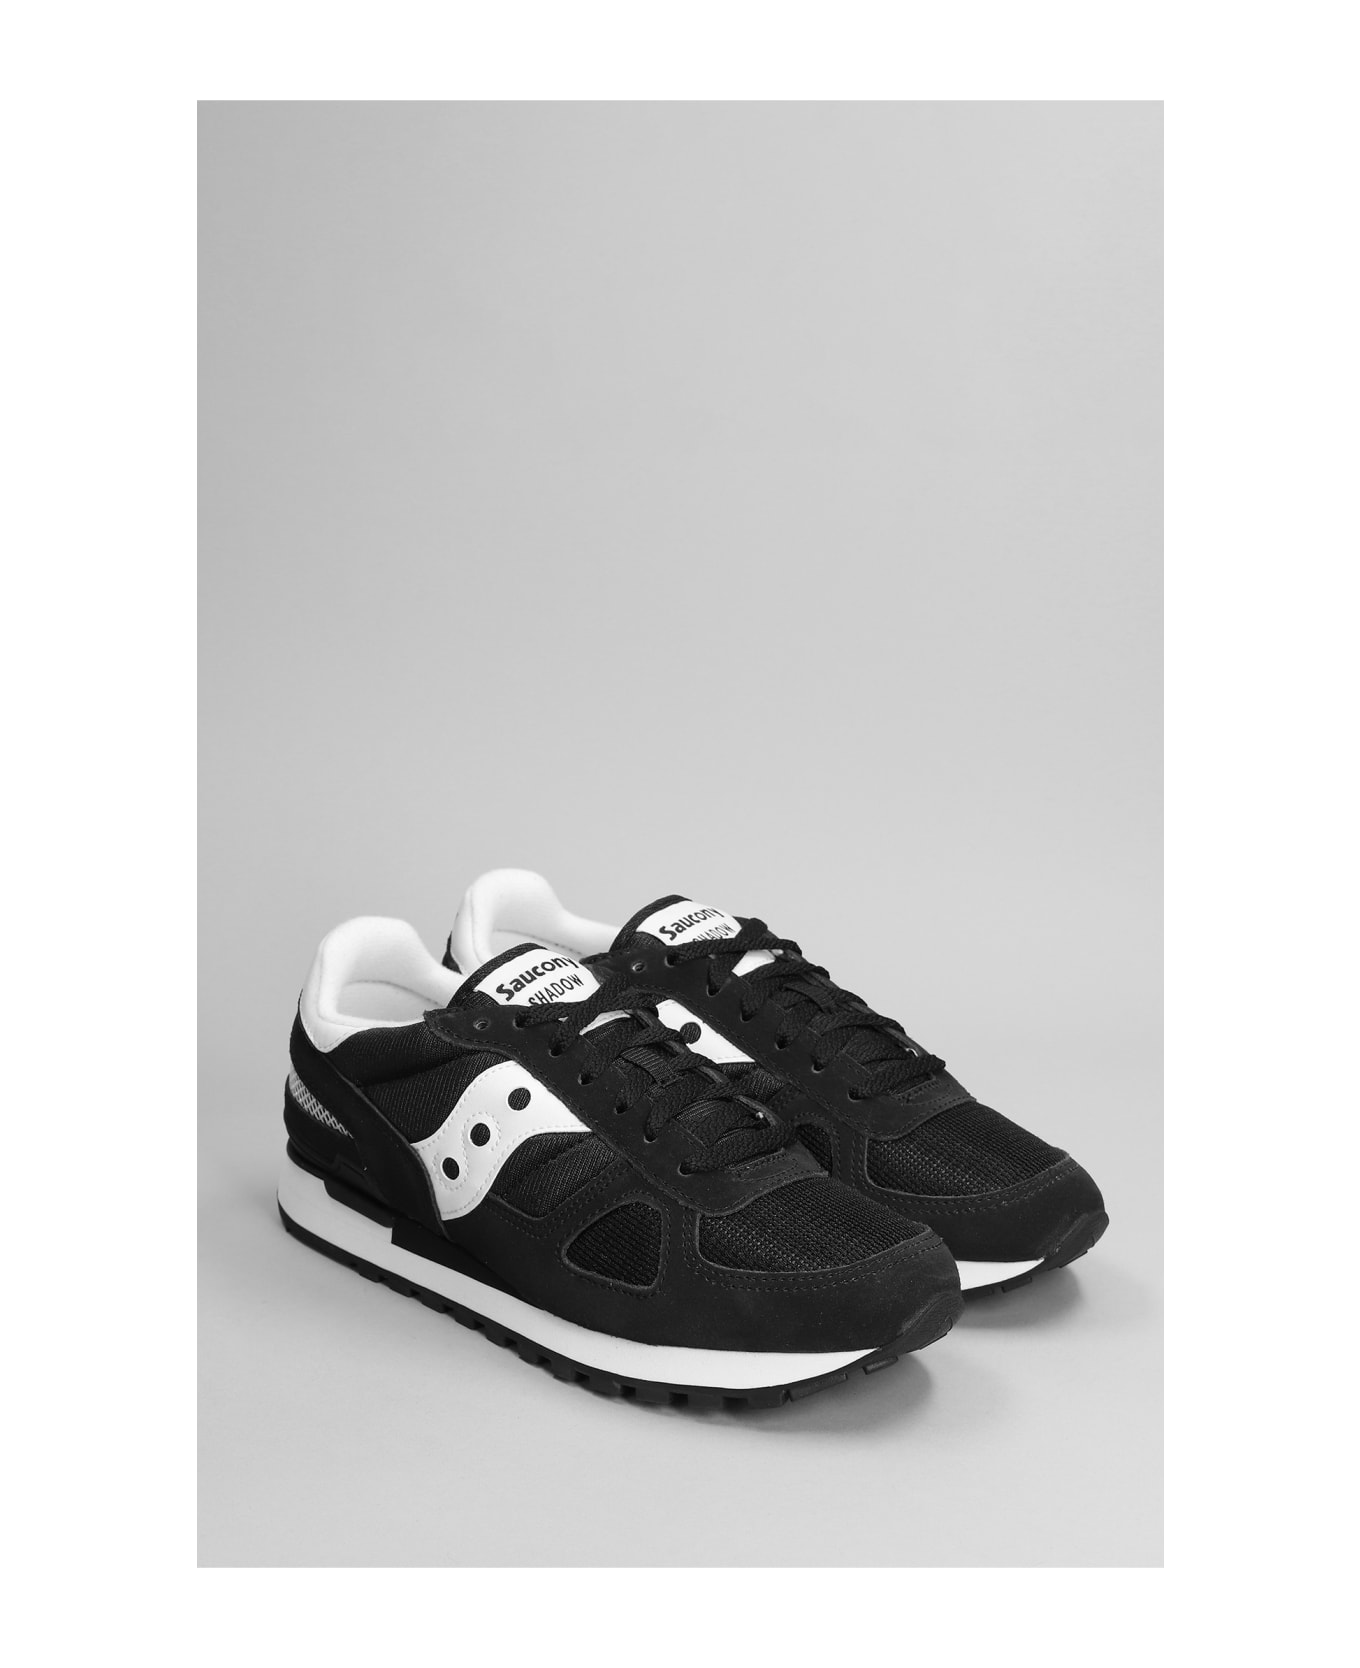 Saucony Shadow Original Sneakers In Black Suede And Fabric - Black Boston